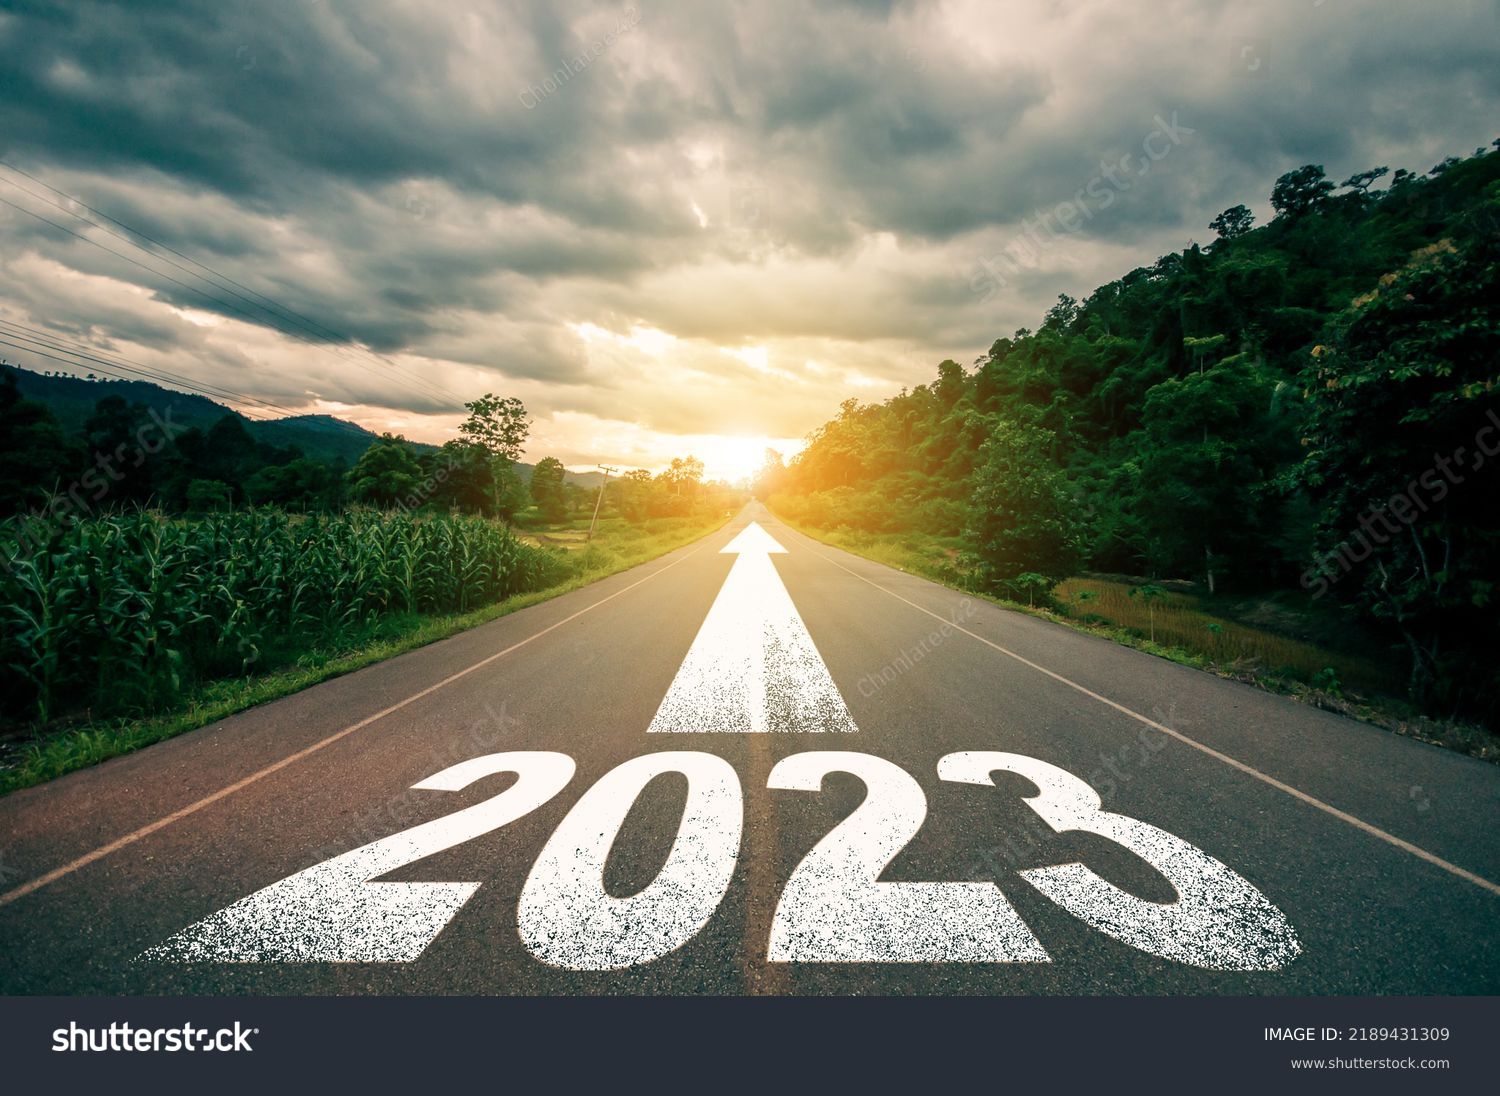 New year 2023 or straight forward concept. Text 2023 written on the road in the middle of asphalt road with at sunset. Concept of planning, goal, challenge, new year resolution.
 #2189431309